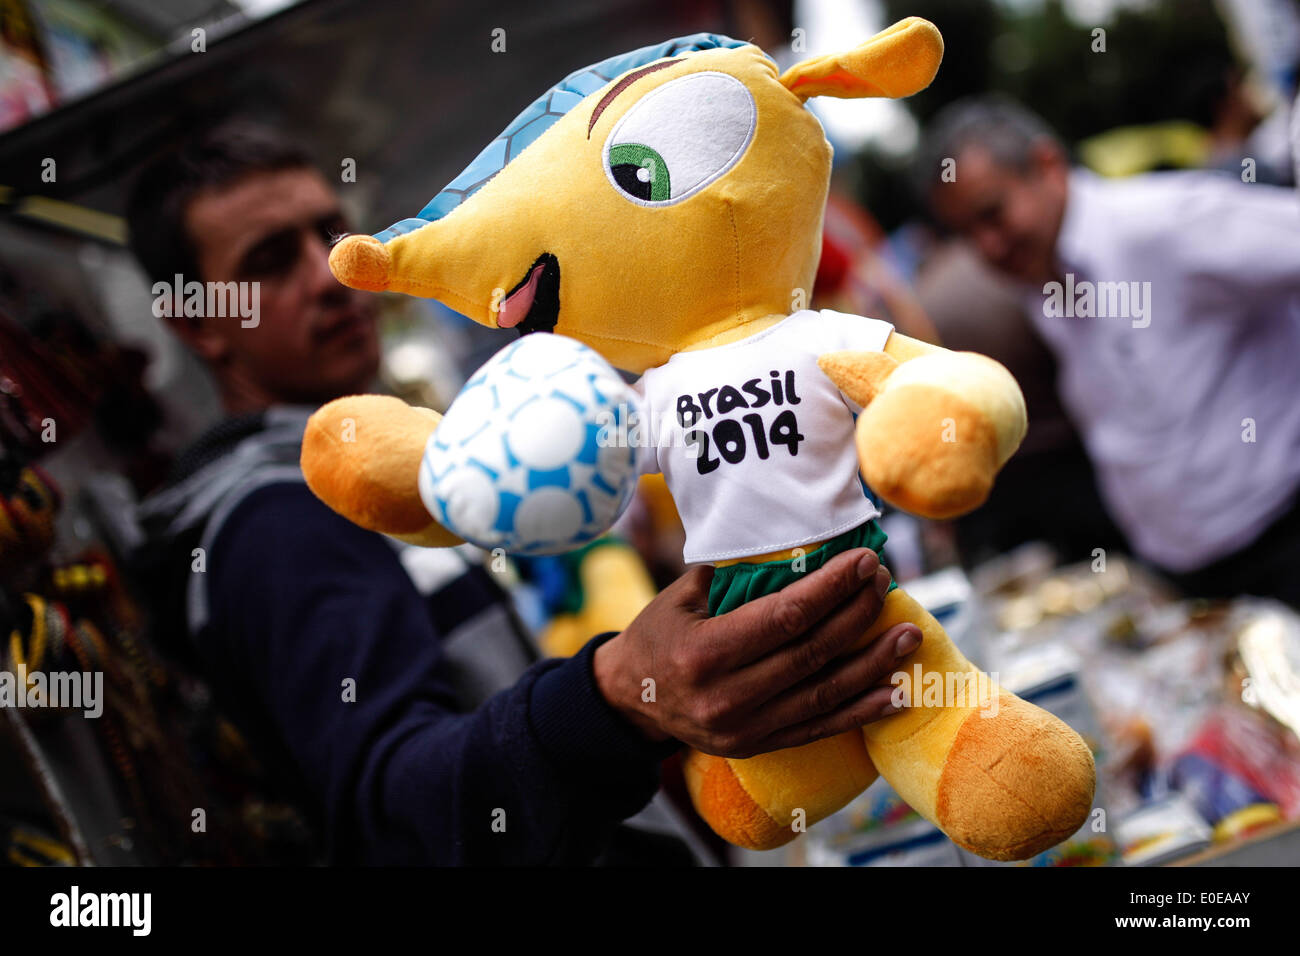 Bogota. 9th May, 2014. Image taken on May 9, 2014 shows a man selling a figure of 'Fuleco', the official FIFA World Cup Brazil 2014 mascot, in Bogota, capital of Colombia. Credit:  Jhon Paz/Xinhua/Alamy Live News Stock Photo